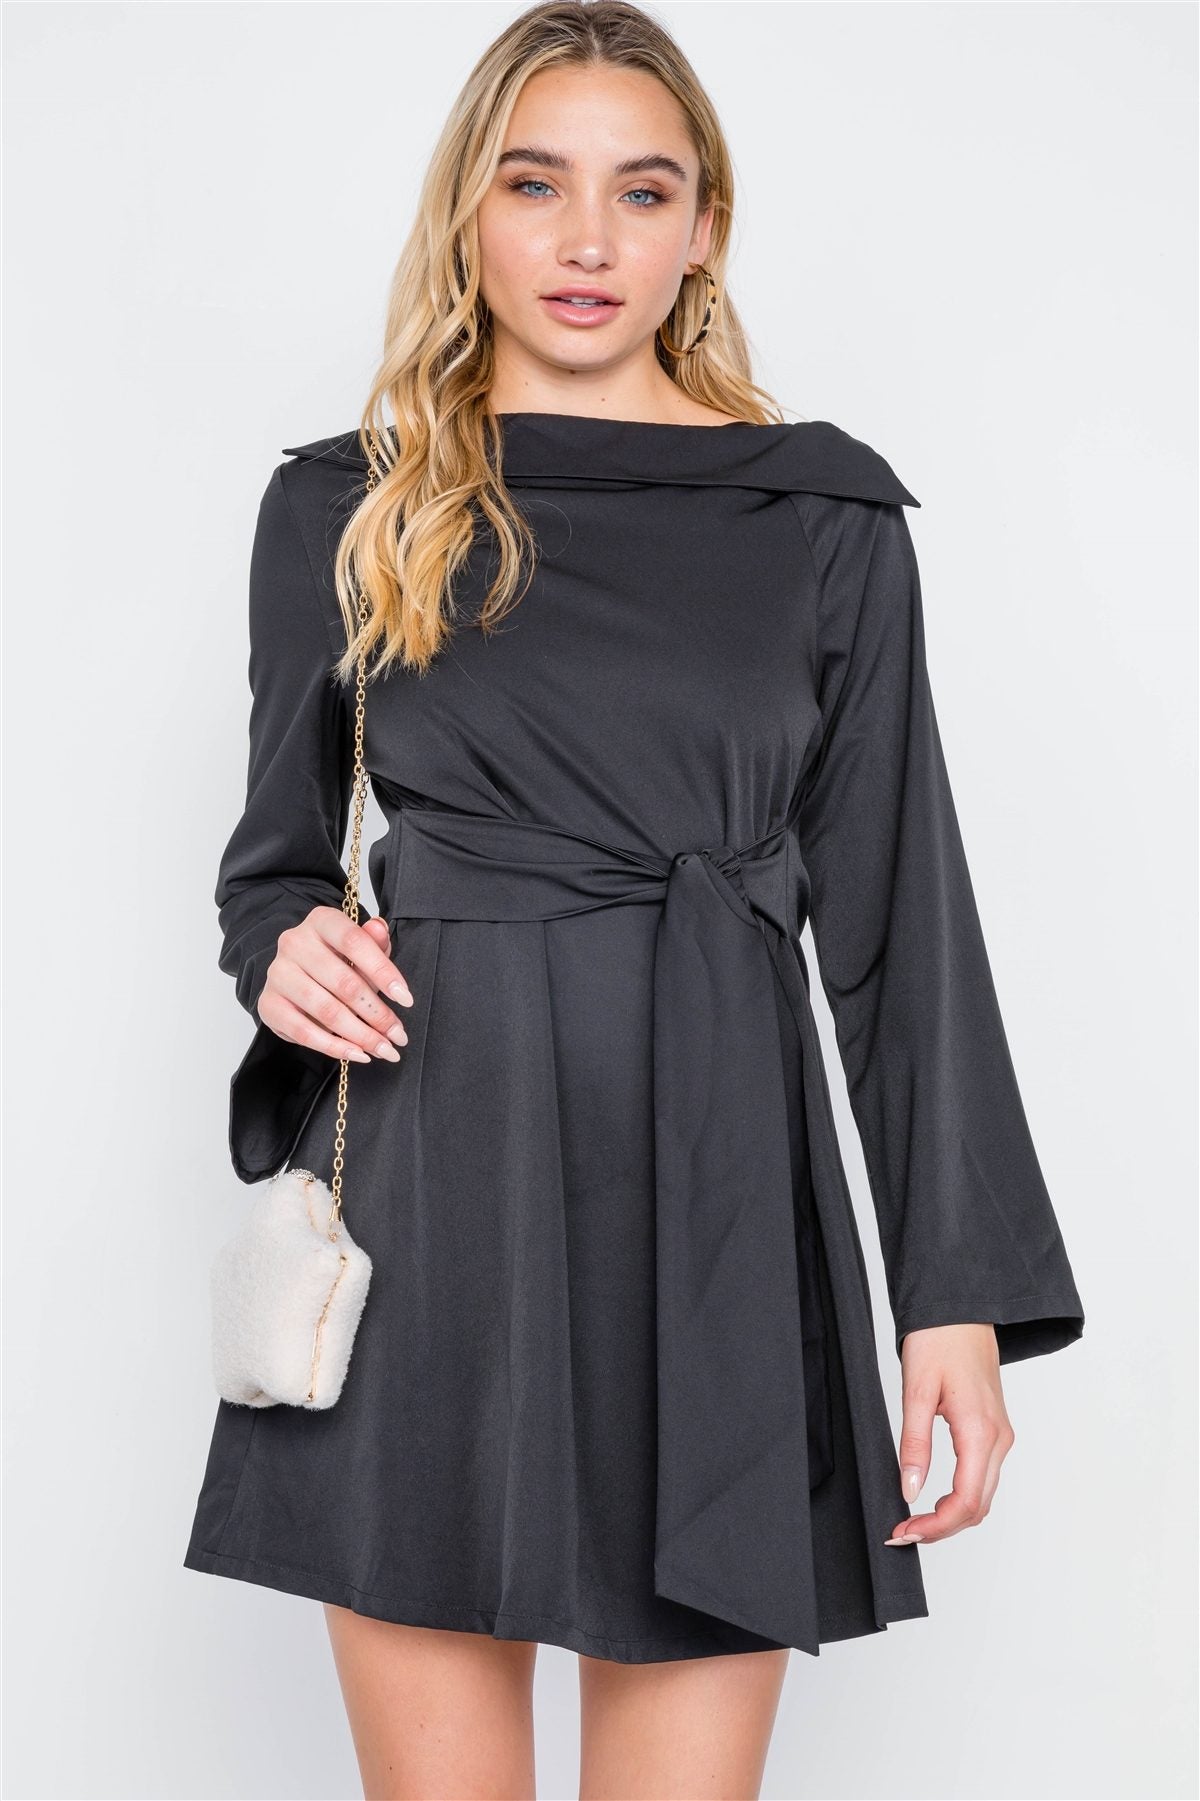 Straight Neck Solid Front-tie Dress